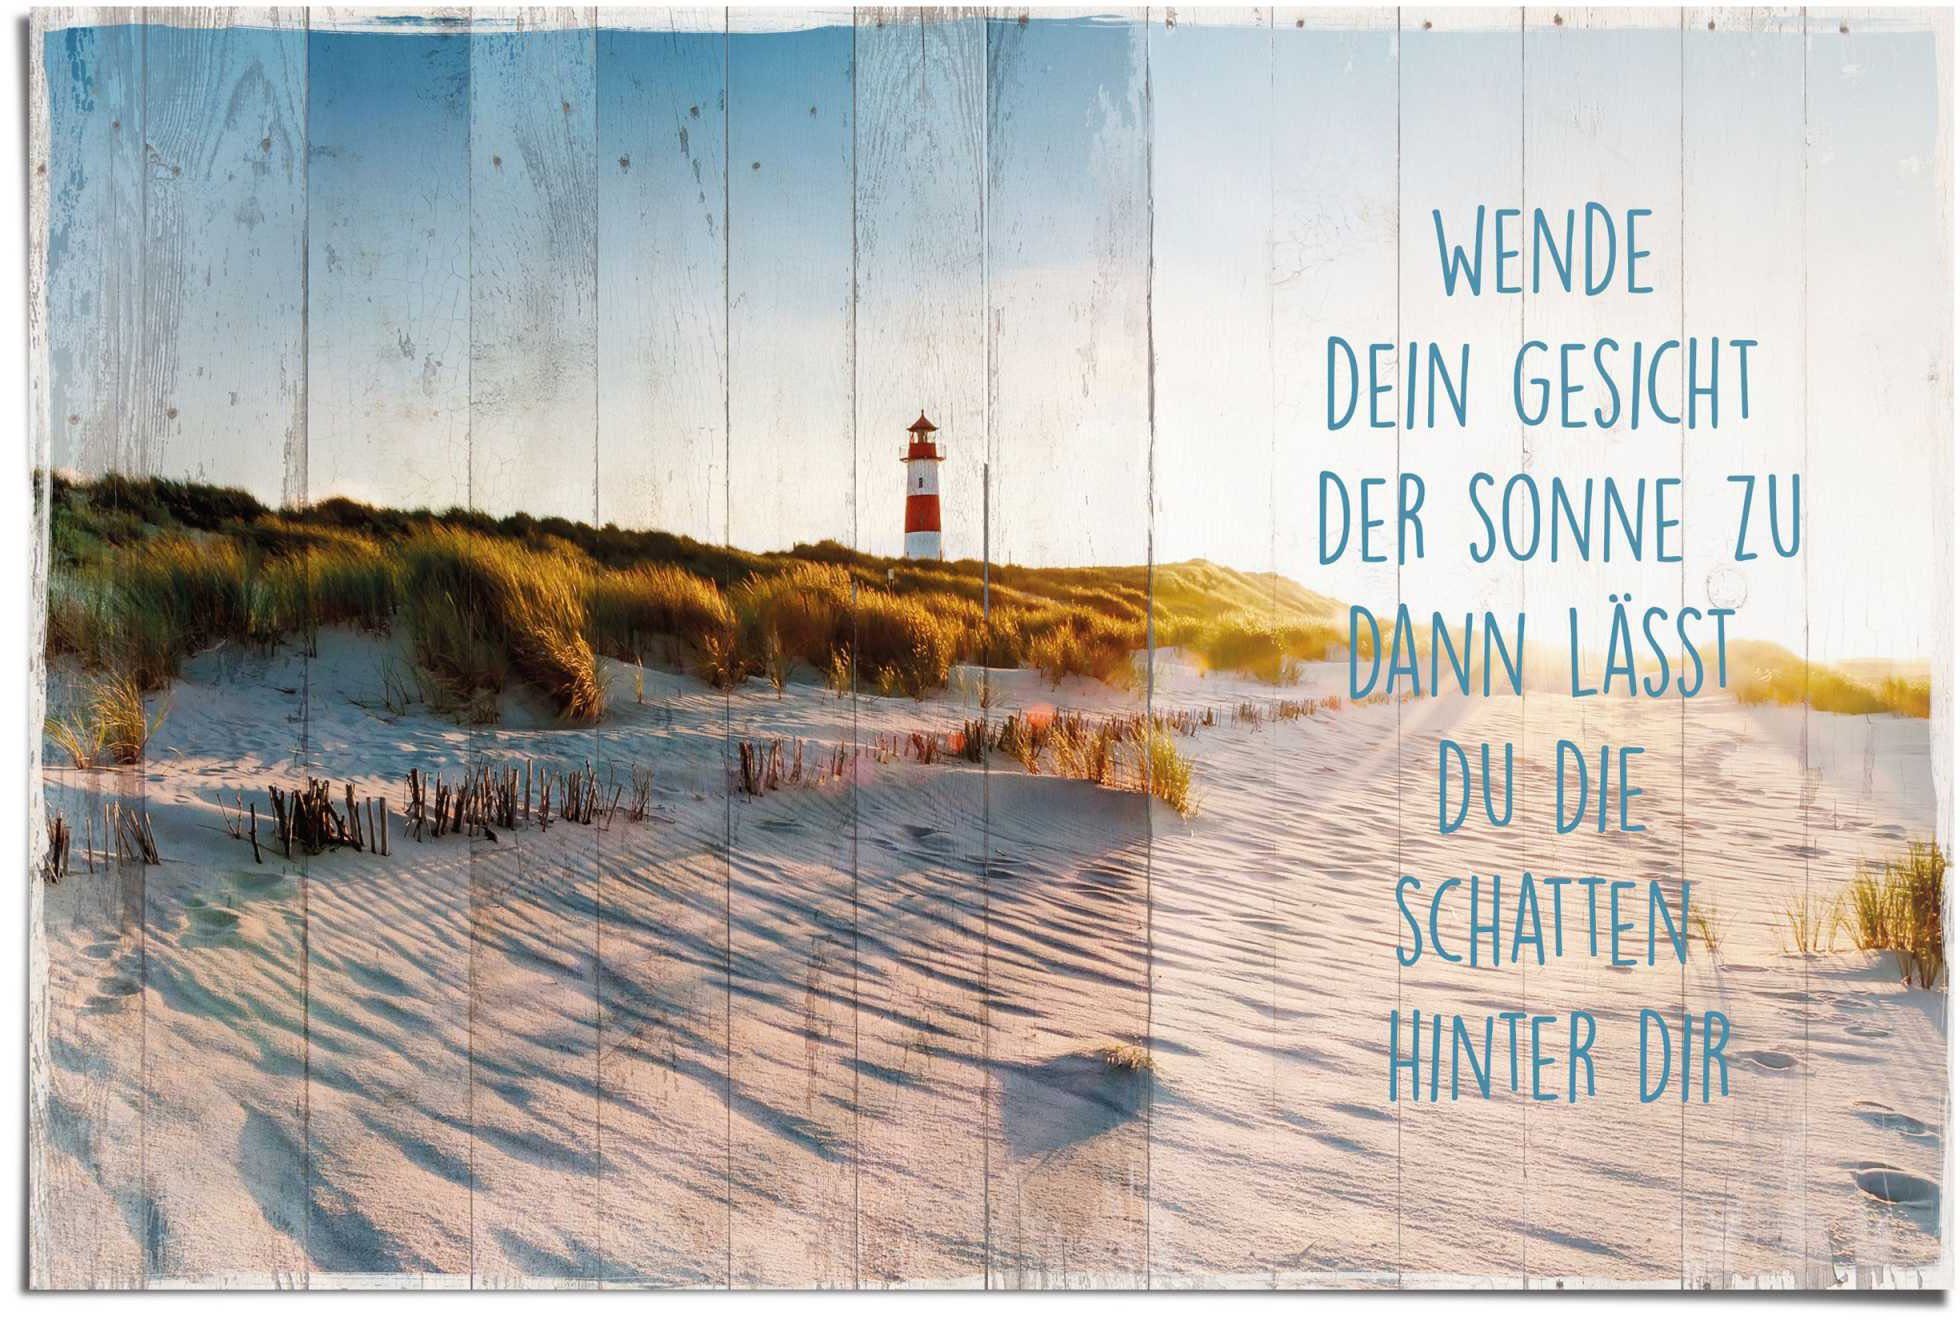 Strand, Poster (1 Sonne St) am Reinders!